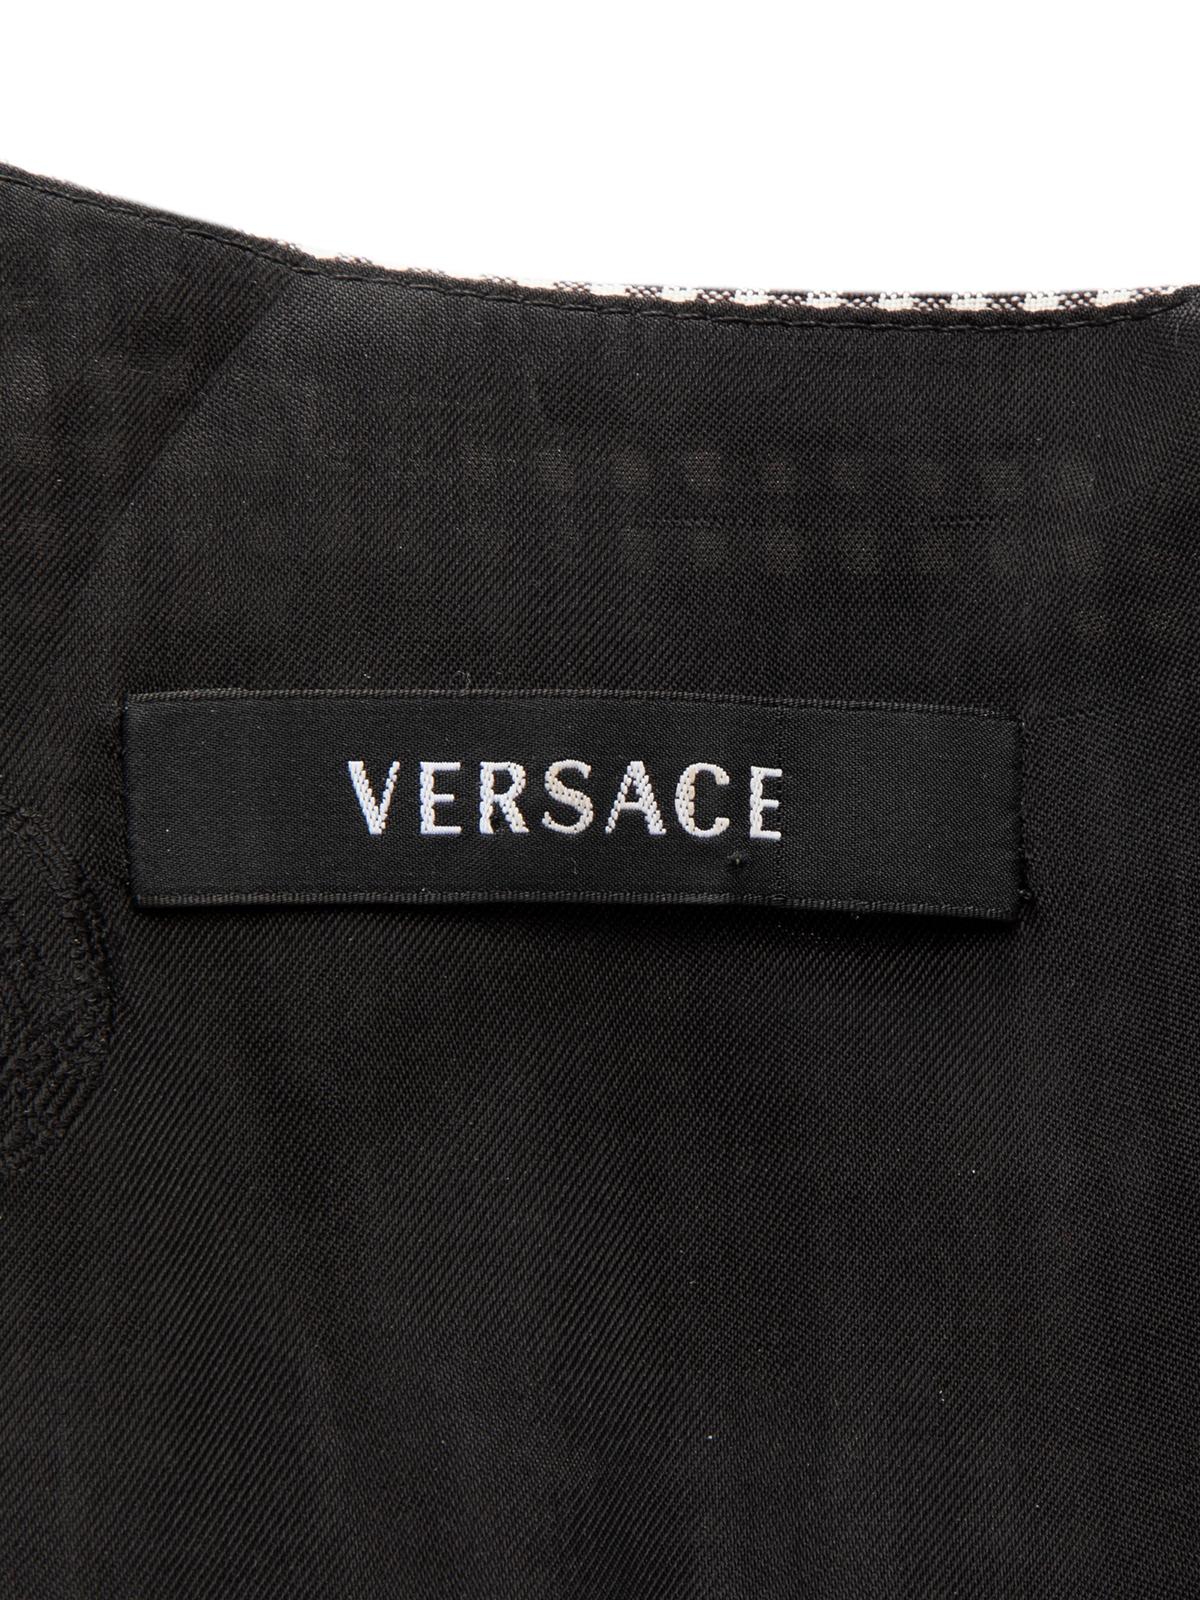 Versace Women's Gingham Dress with Contrast Pocket 2